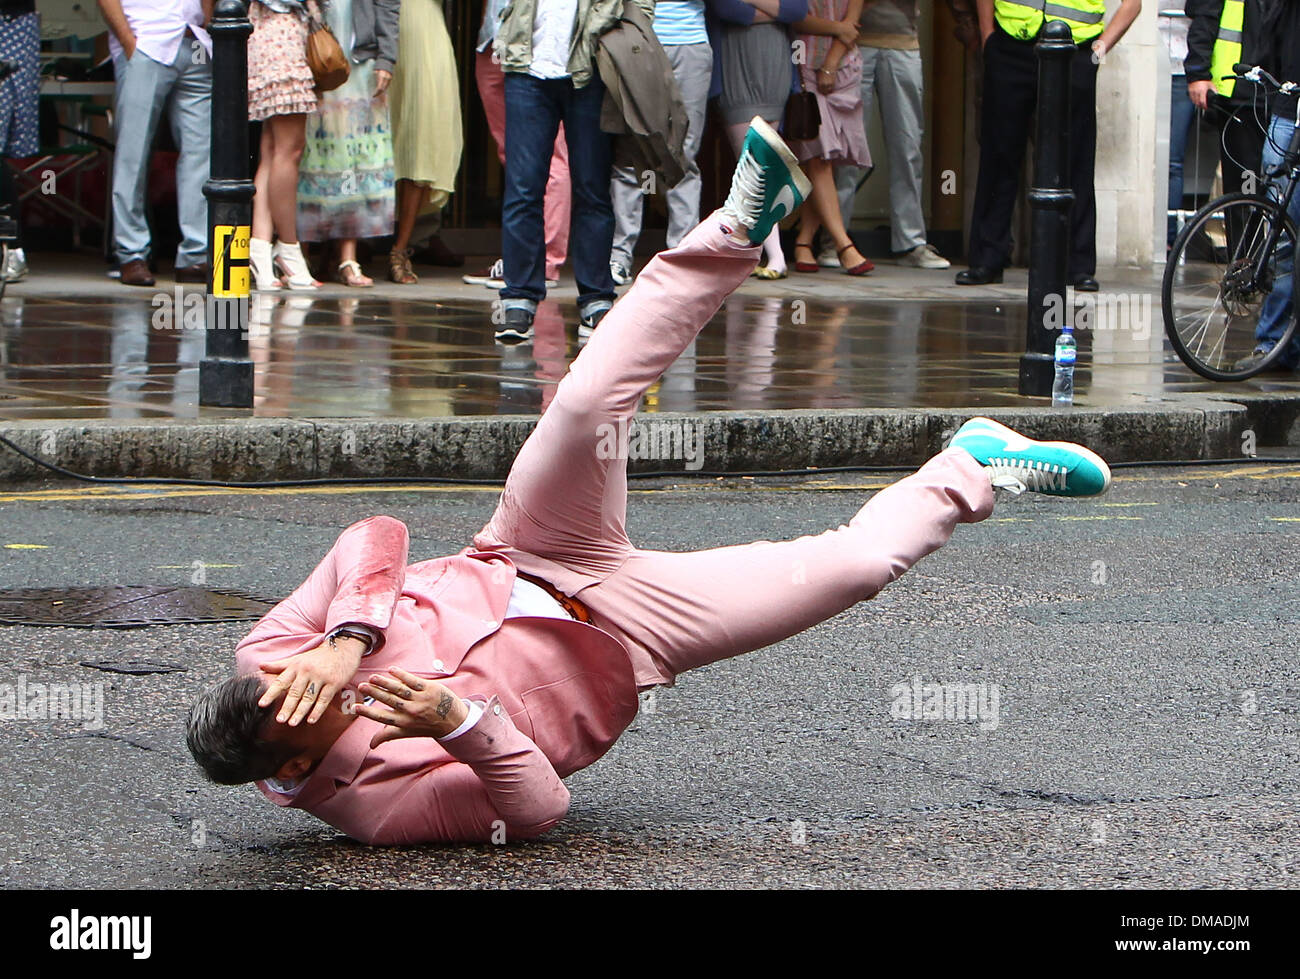 Robbie Williams performs a breakdance routine in a pink suit and turquoise  Nike high-top shoes as he films scenes for his new Stock Photo - Alamy